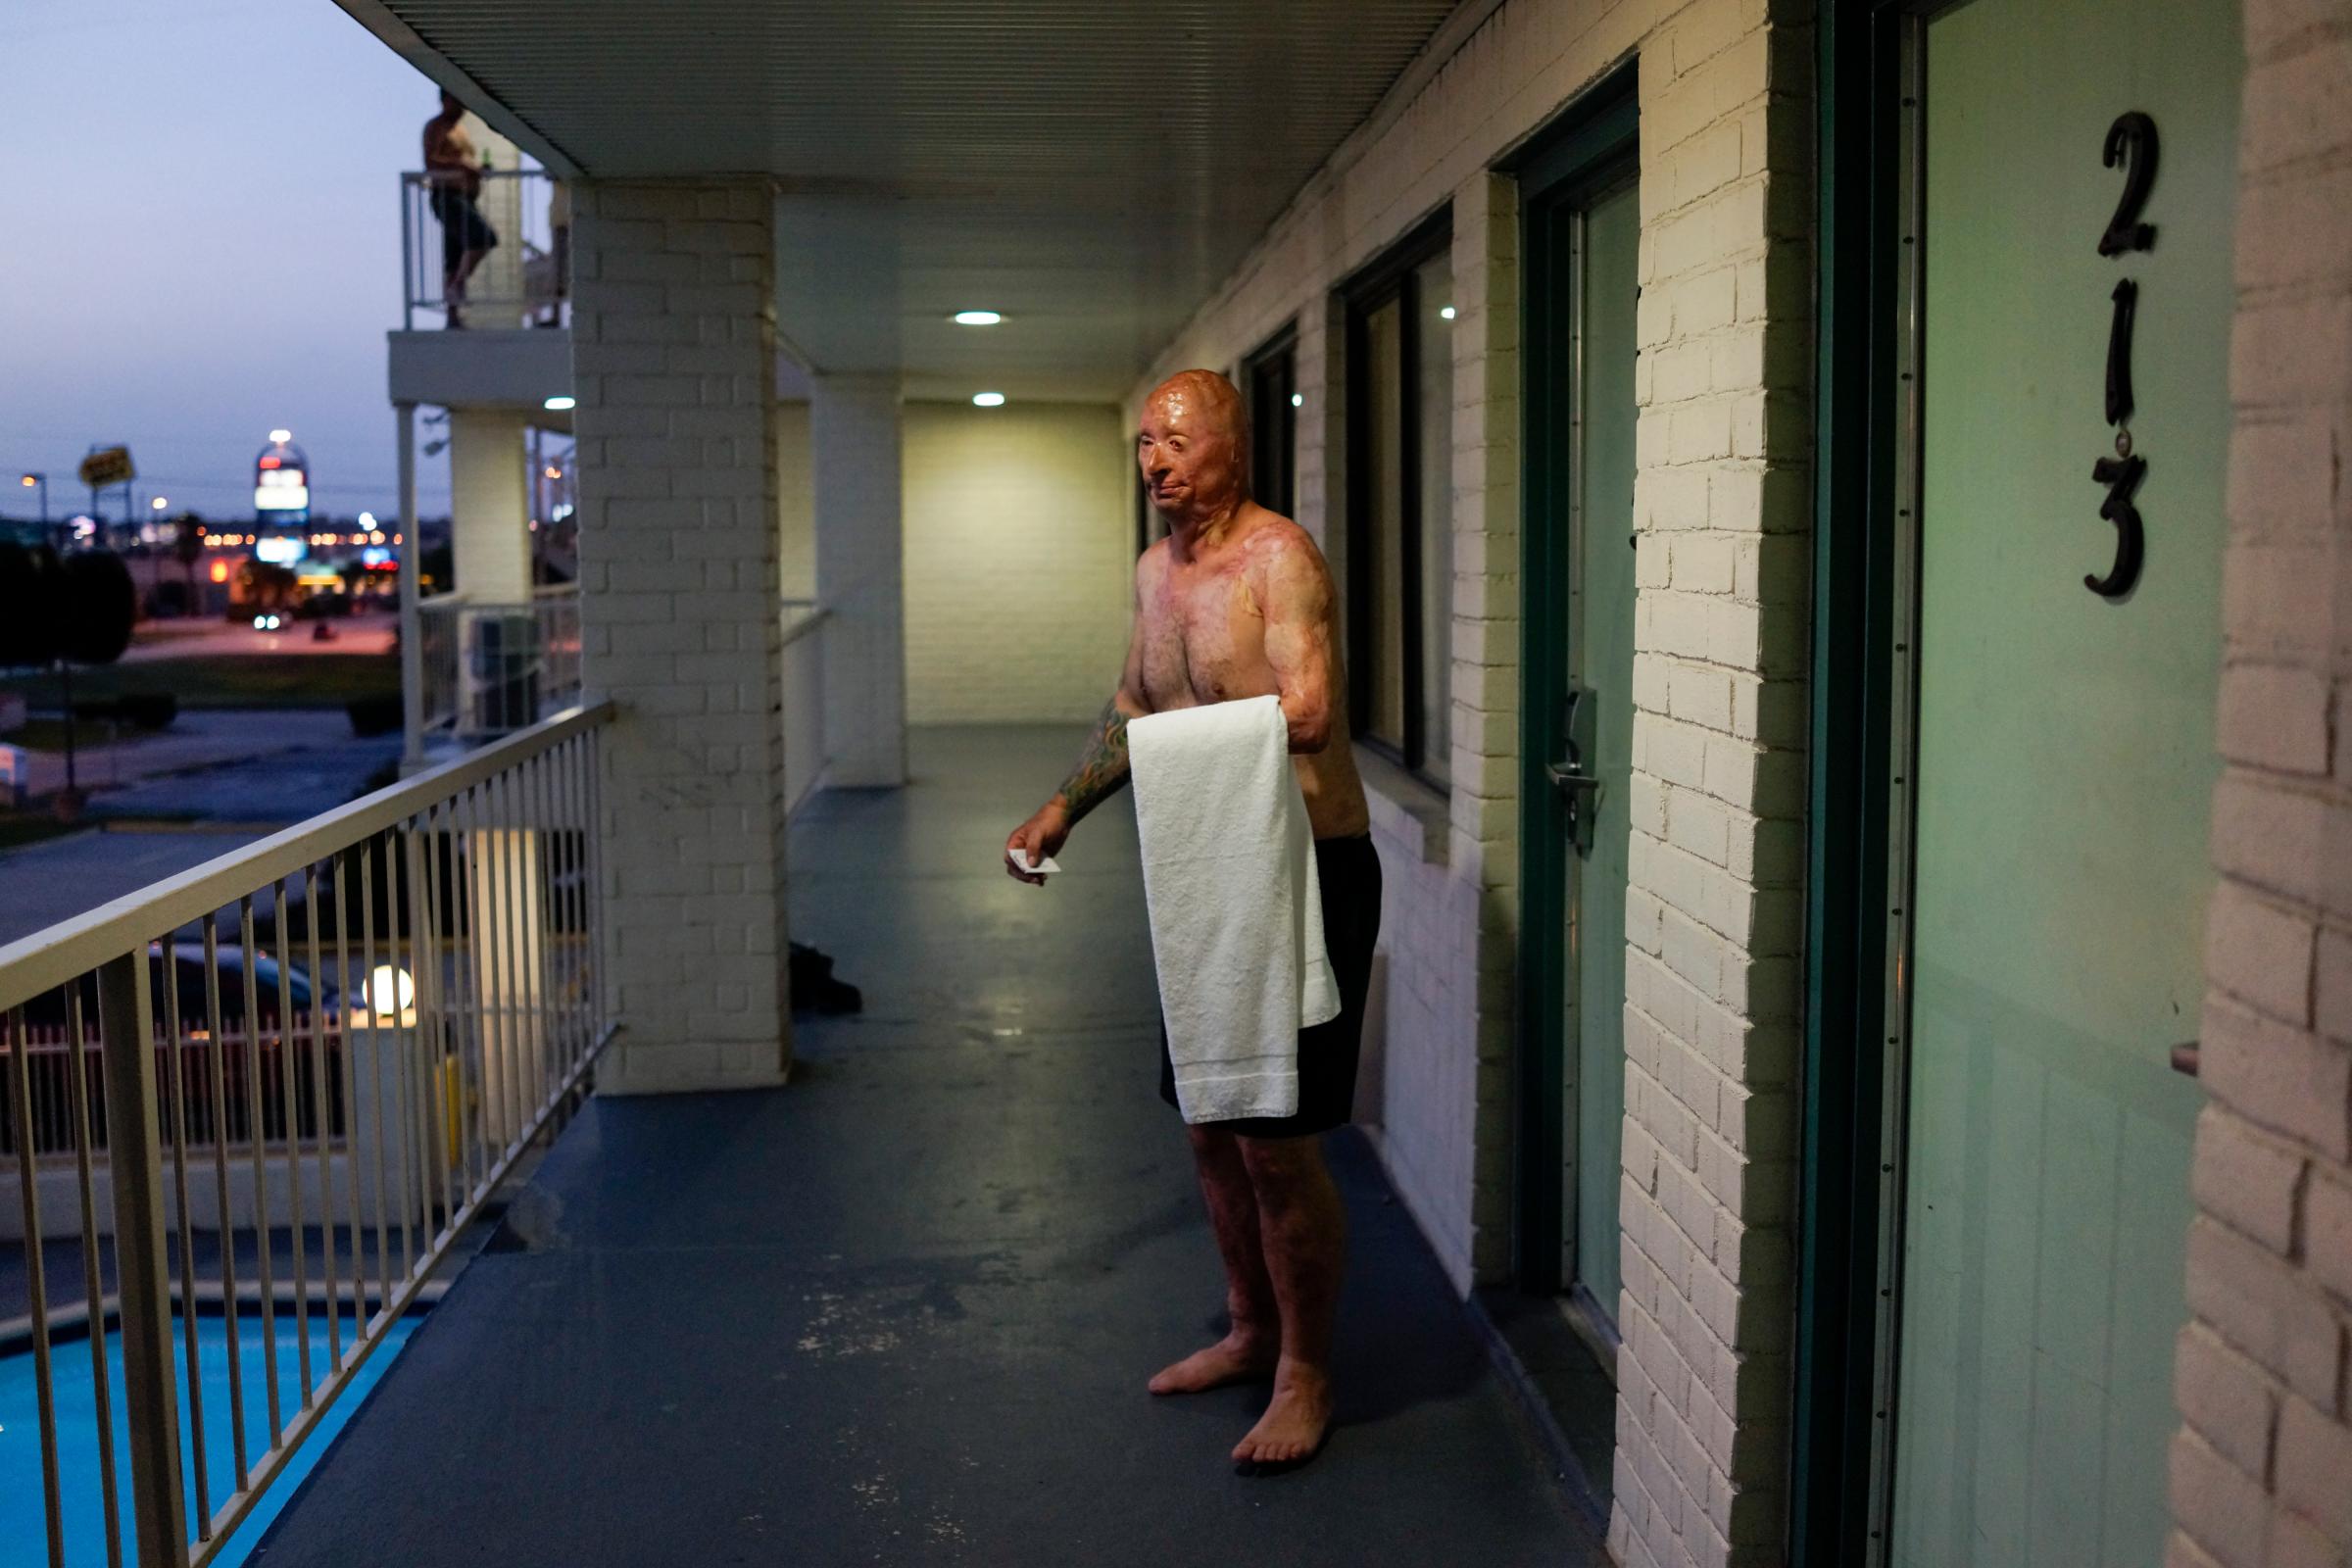 2013. Humble, TX. USA. Bobby steps out of his room to take a swim at a Motel 6 after visiting the father of Rodney McCandless. Rodney was killed in the IED explosion that injured Bobby. For years McCandless's family didn't know that anyone had survived the attack until Bobby was able to reach them by Facebook. It was their first meeting and Bobby wanted to pay his respects. Bobby Henline, 41, veteran of four tours to Iraq and sole survivor of an IED blast that killed the other four soldiers in his humvee in Iraq in 2007. He is now a standup comedian launching a new career with a routine built around his injuries. He received burns over 38% of his body in the blast.